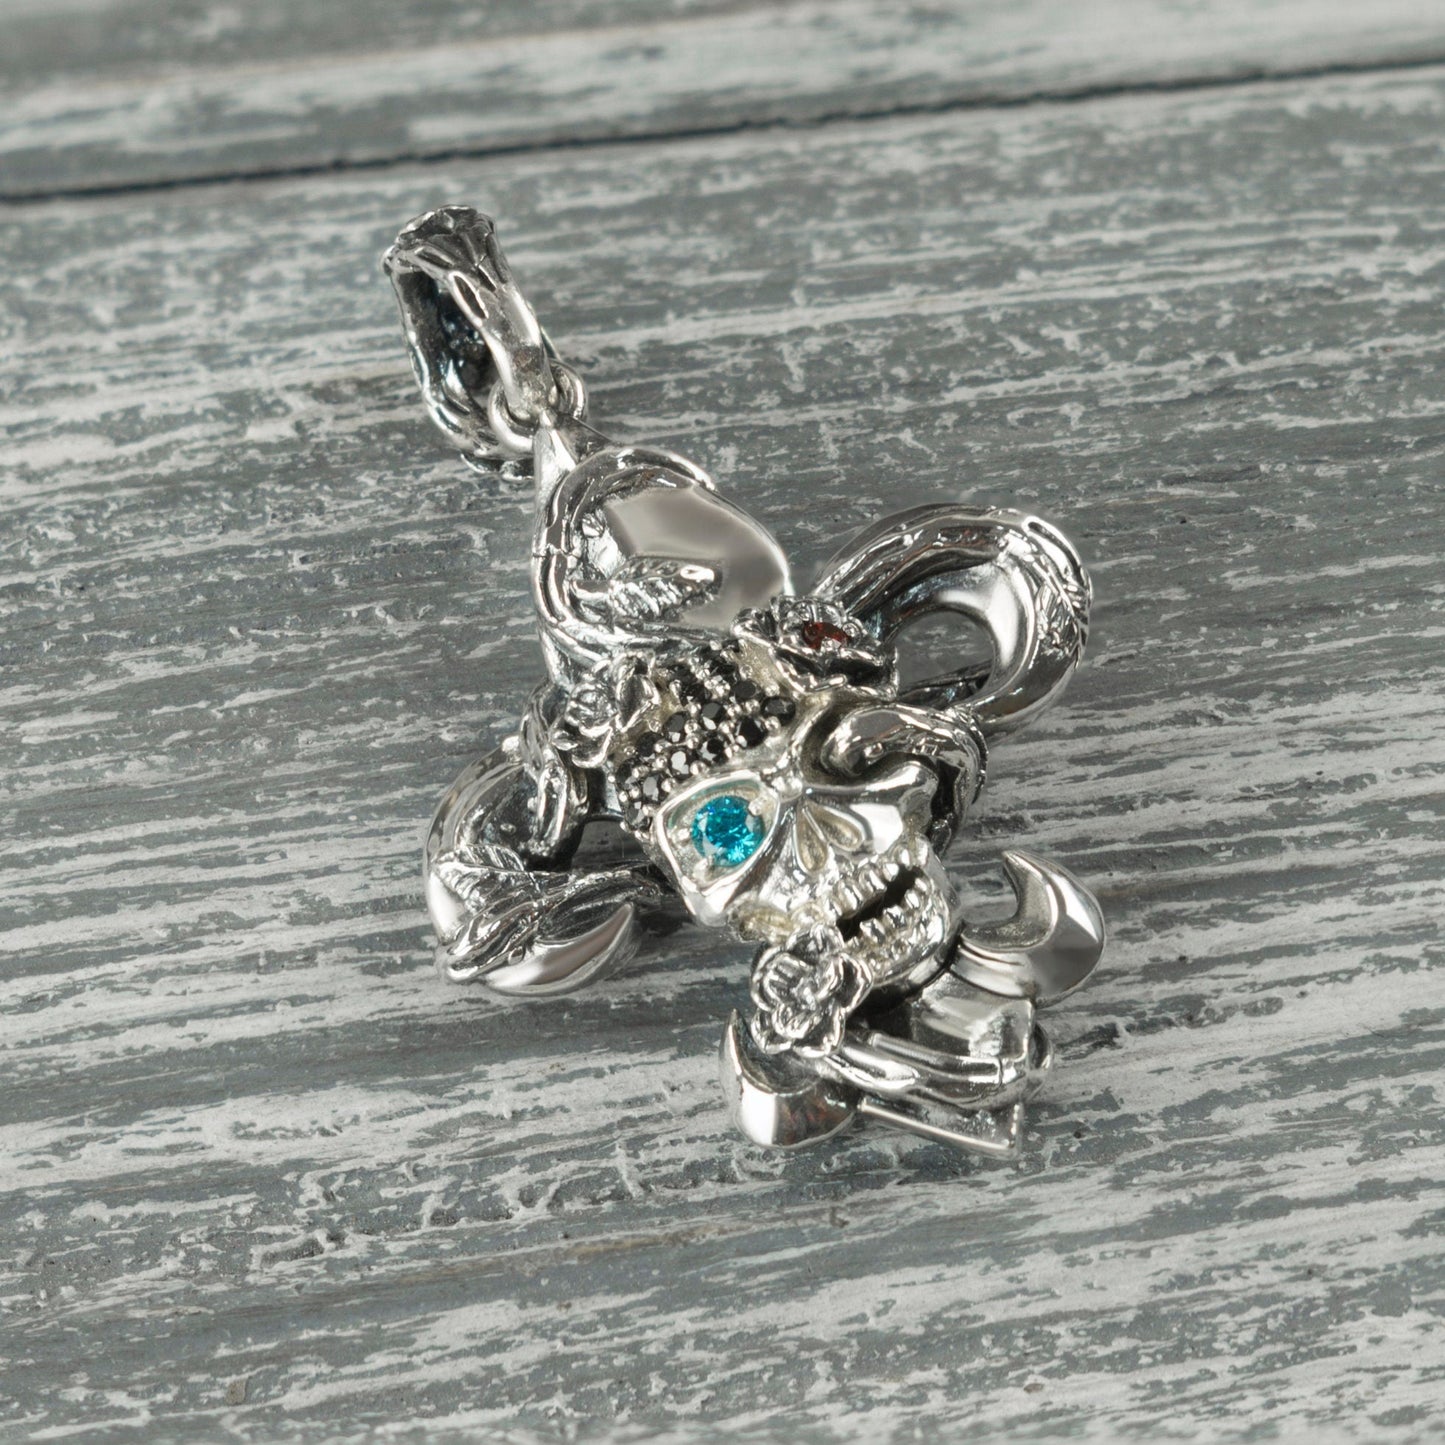 Fleur de Lis Skull pendant Gemstones silver pendant French lily jewelry with skull